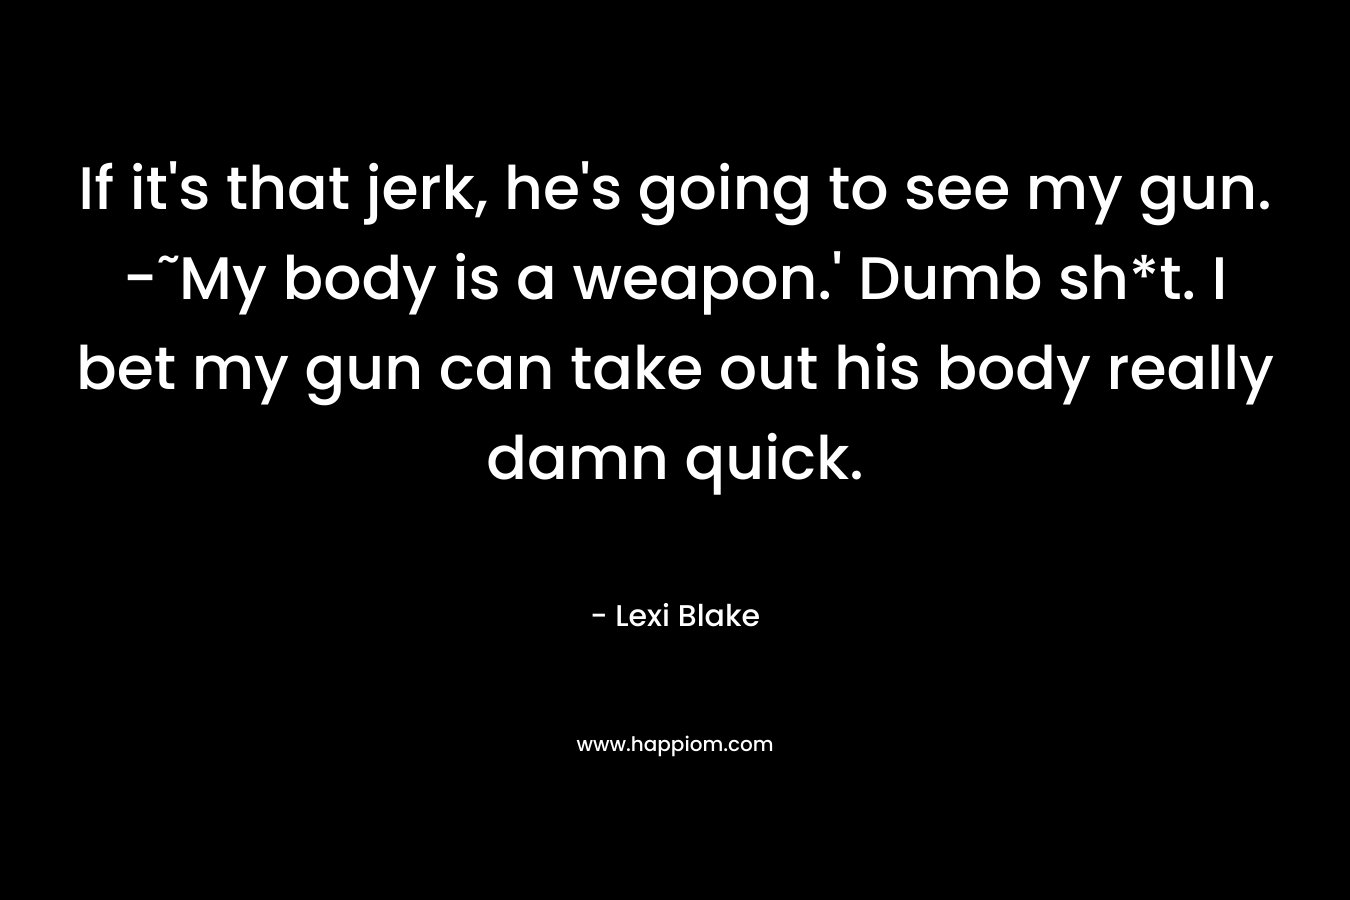 If it’s that jerk, he’s going to see my gun. -˜My body is a weapon.’ Dumb sh*t. I bet my gun can take out his body really damn quick. – Lexi Blake